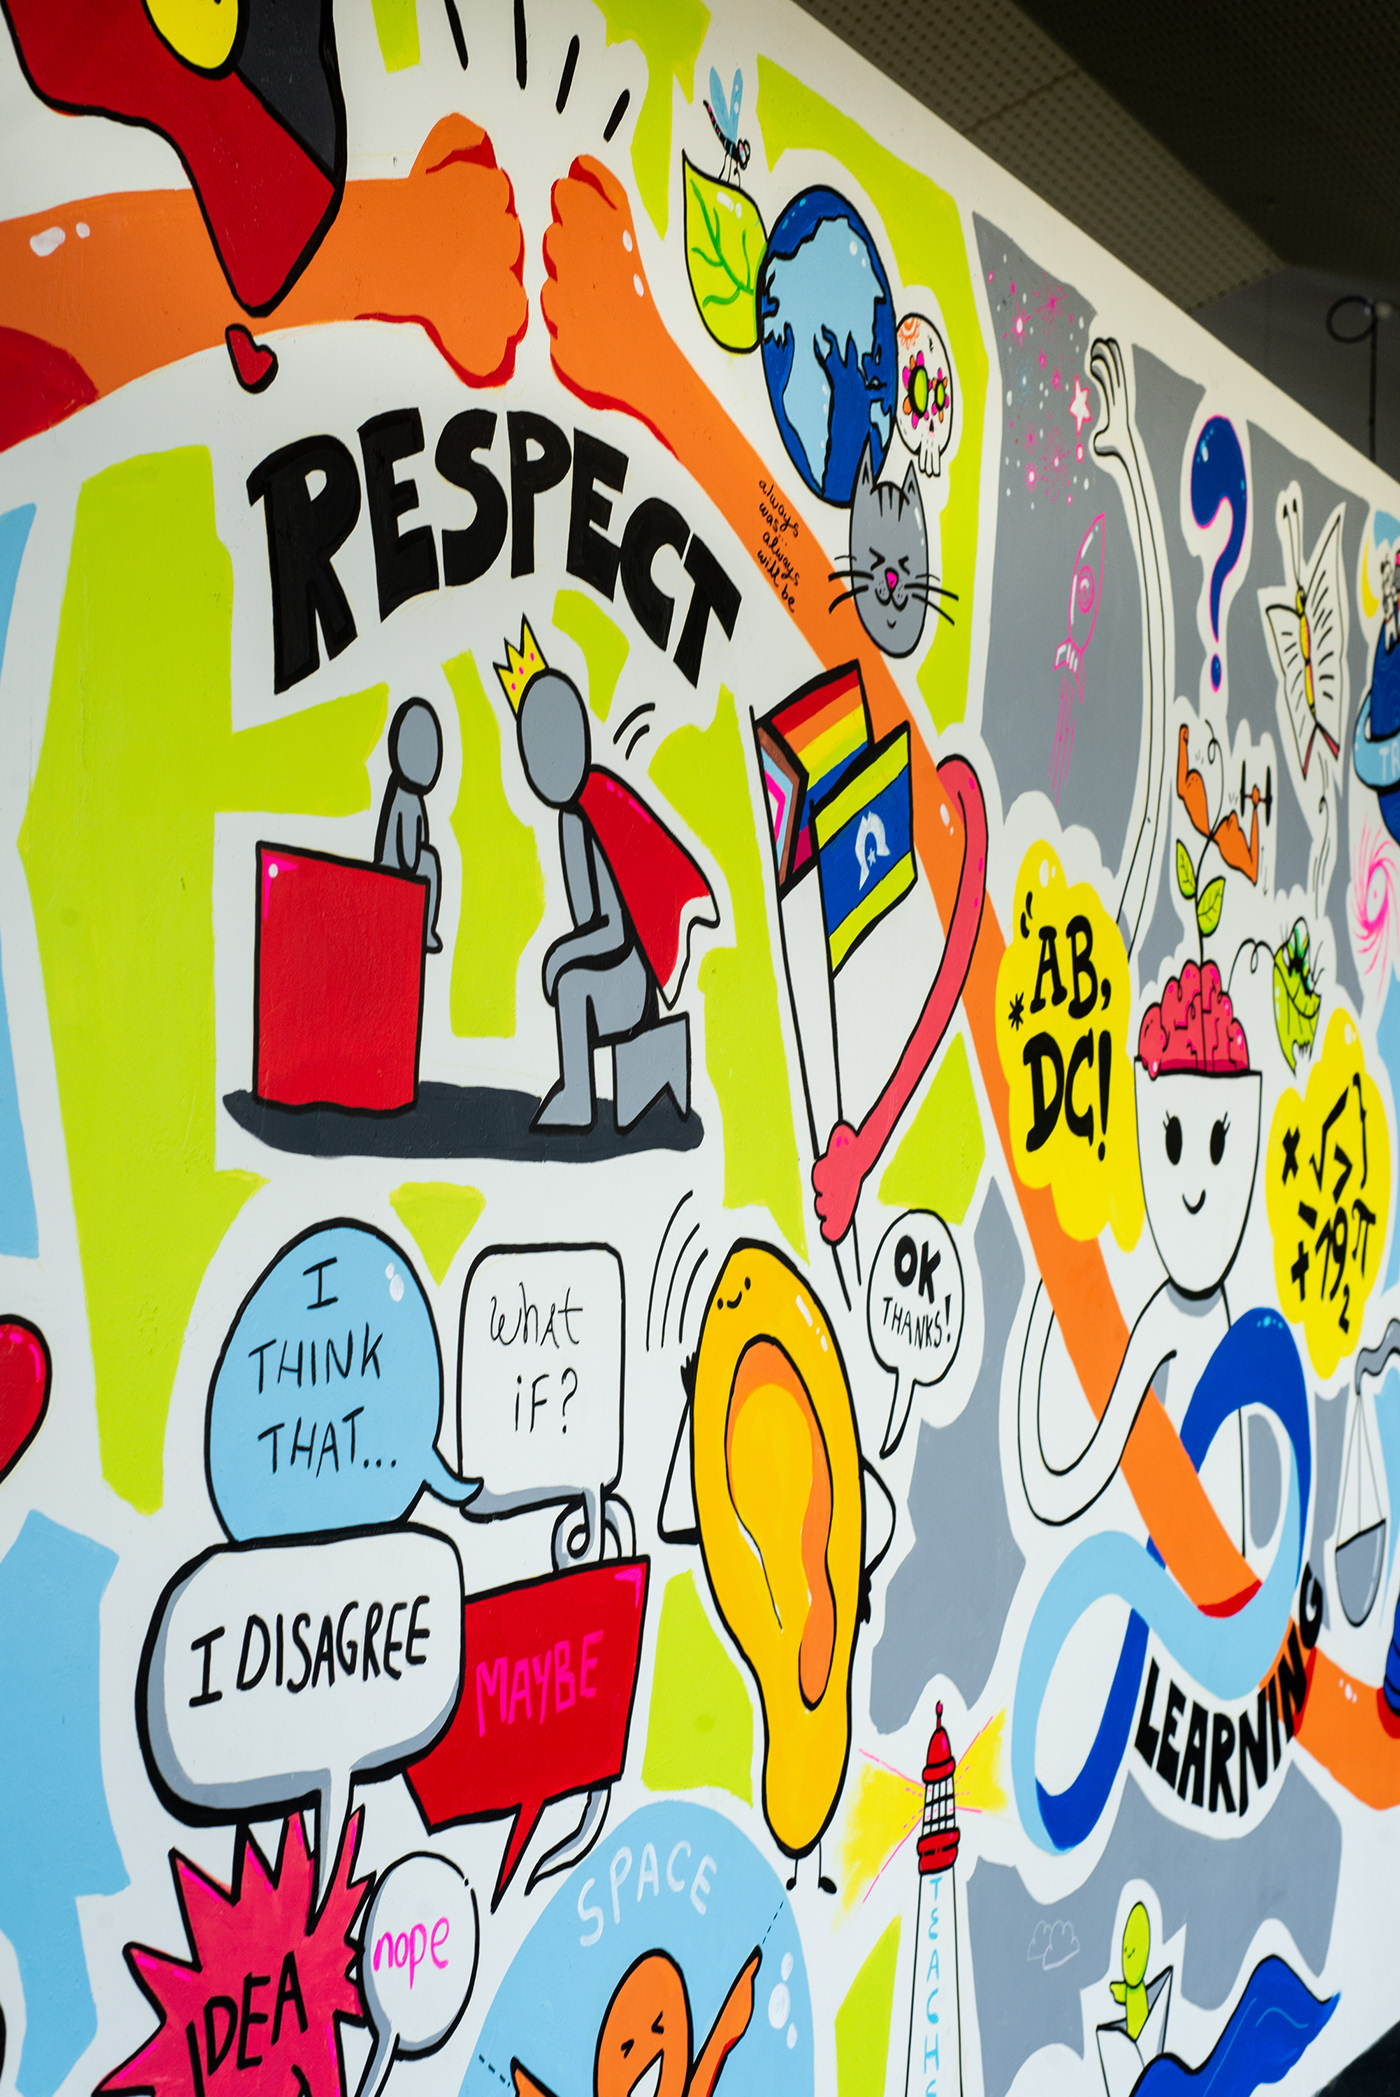 Mural cartoon doodle mural art respect Values Analogue paintbrush primary school